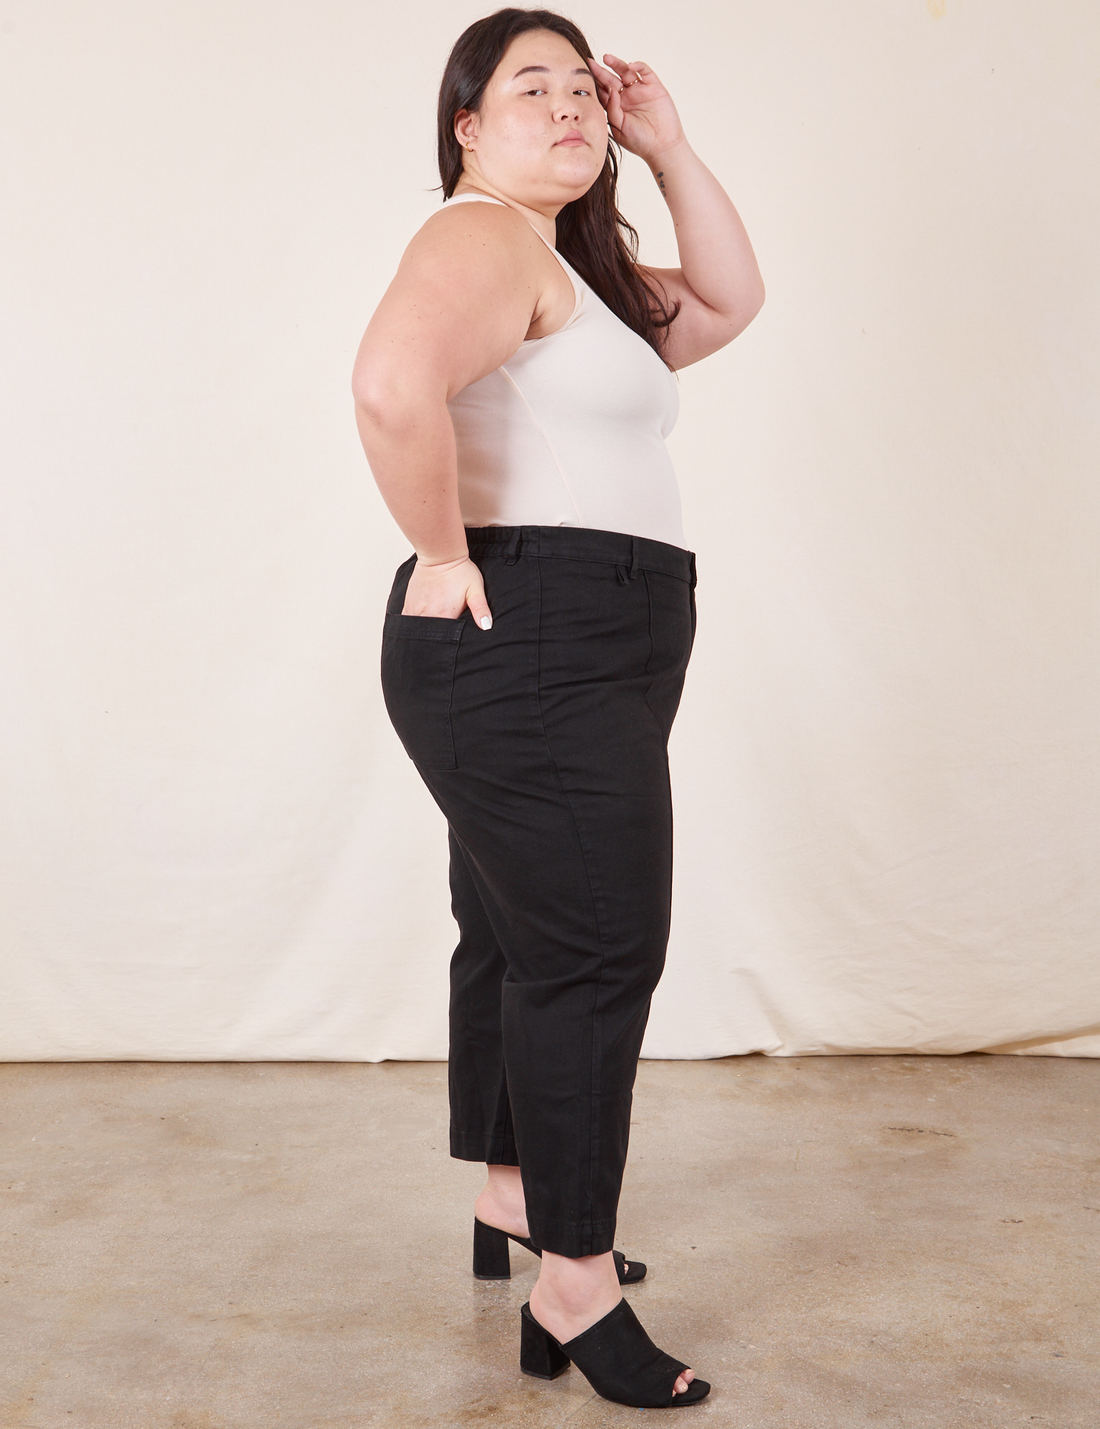 Western Pants in Basic Black side view on Ashley wearing vintage off-white Tank Top